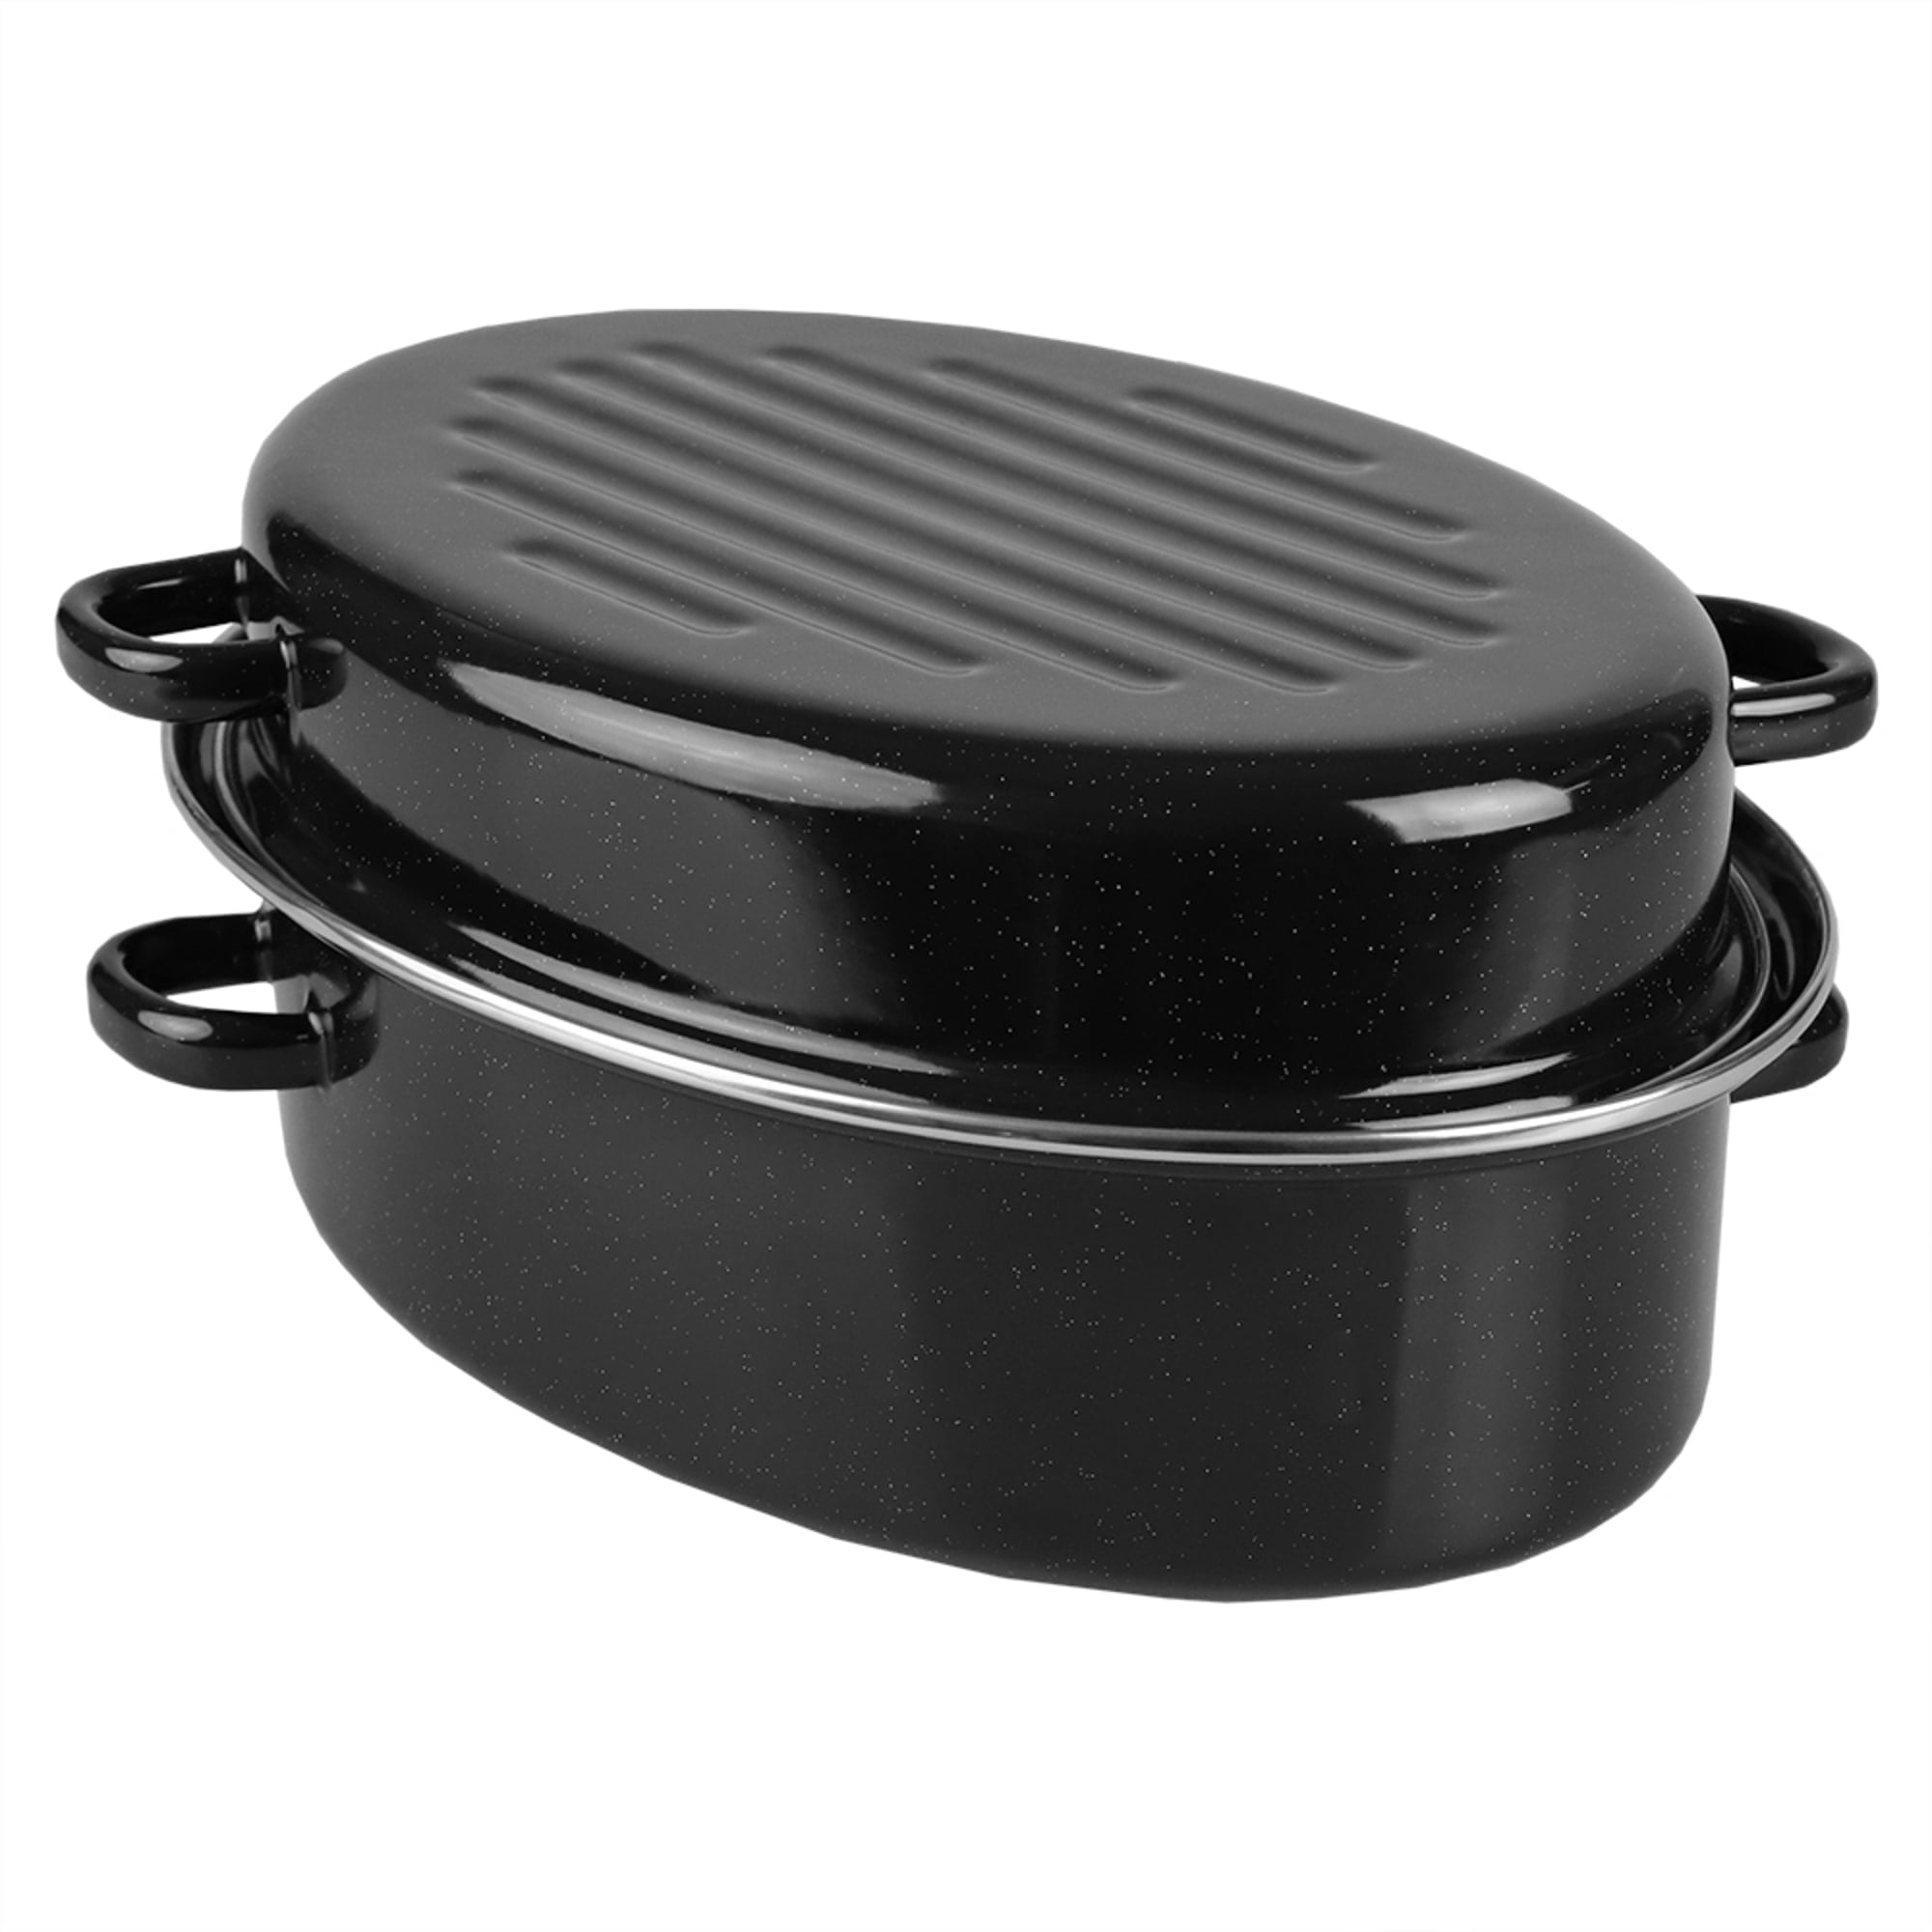 Home Basics Deep Oval Natural Non-Stick 14” Enameled Carbon Steel Roaster Pan with Lid, Black $25.00 EACH, CASE PACK OF 3